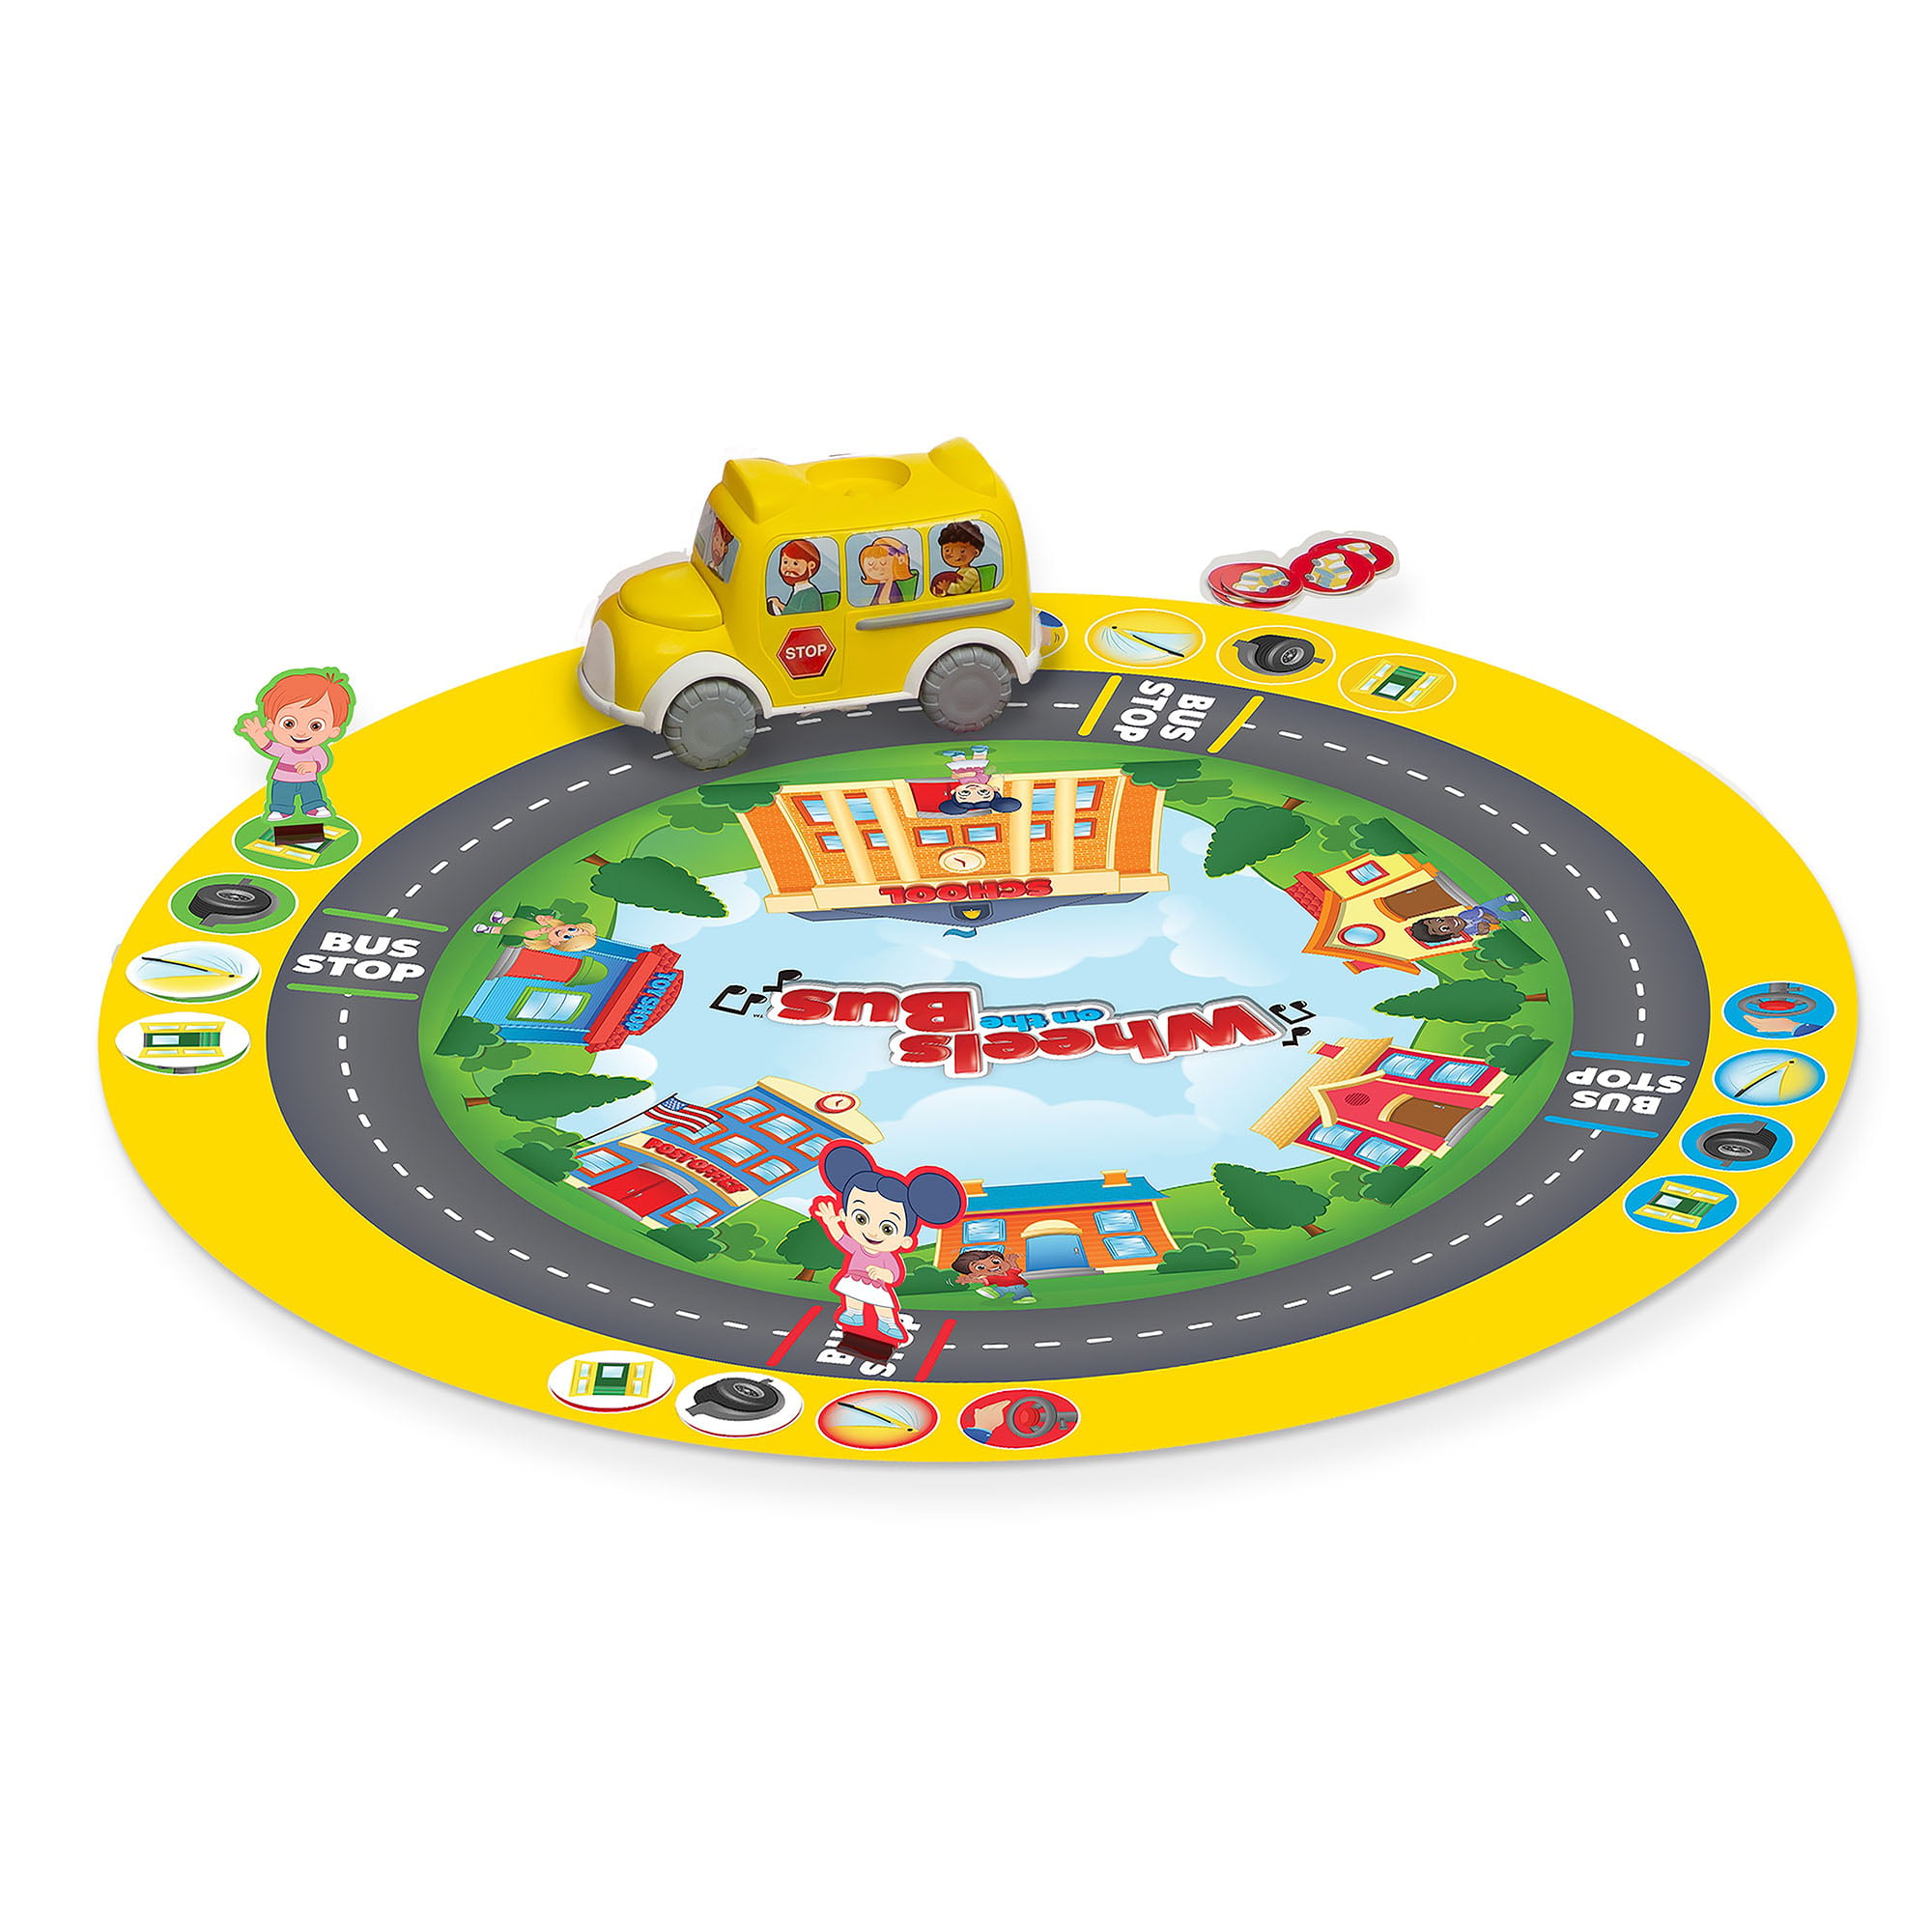 Play Wheels On the Bus  Free Online Games. KidzSearch.com